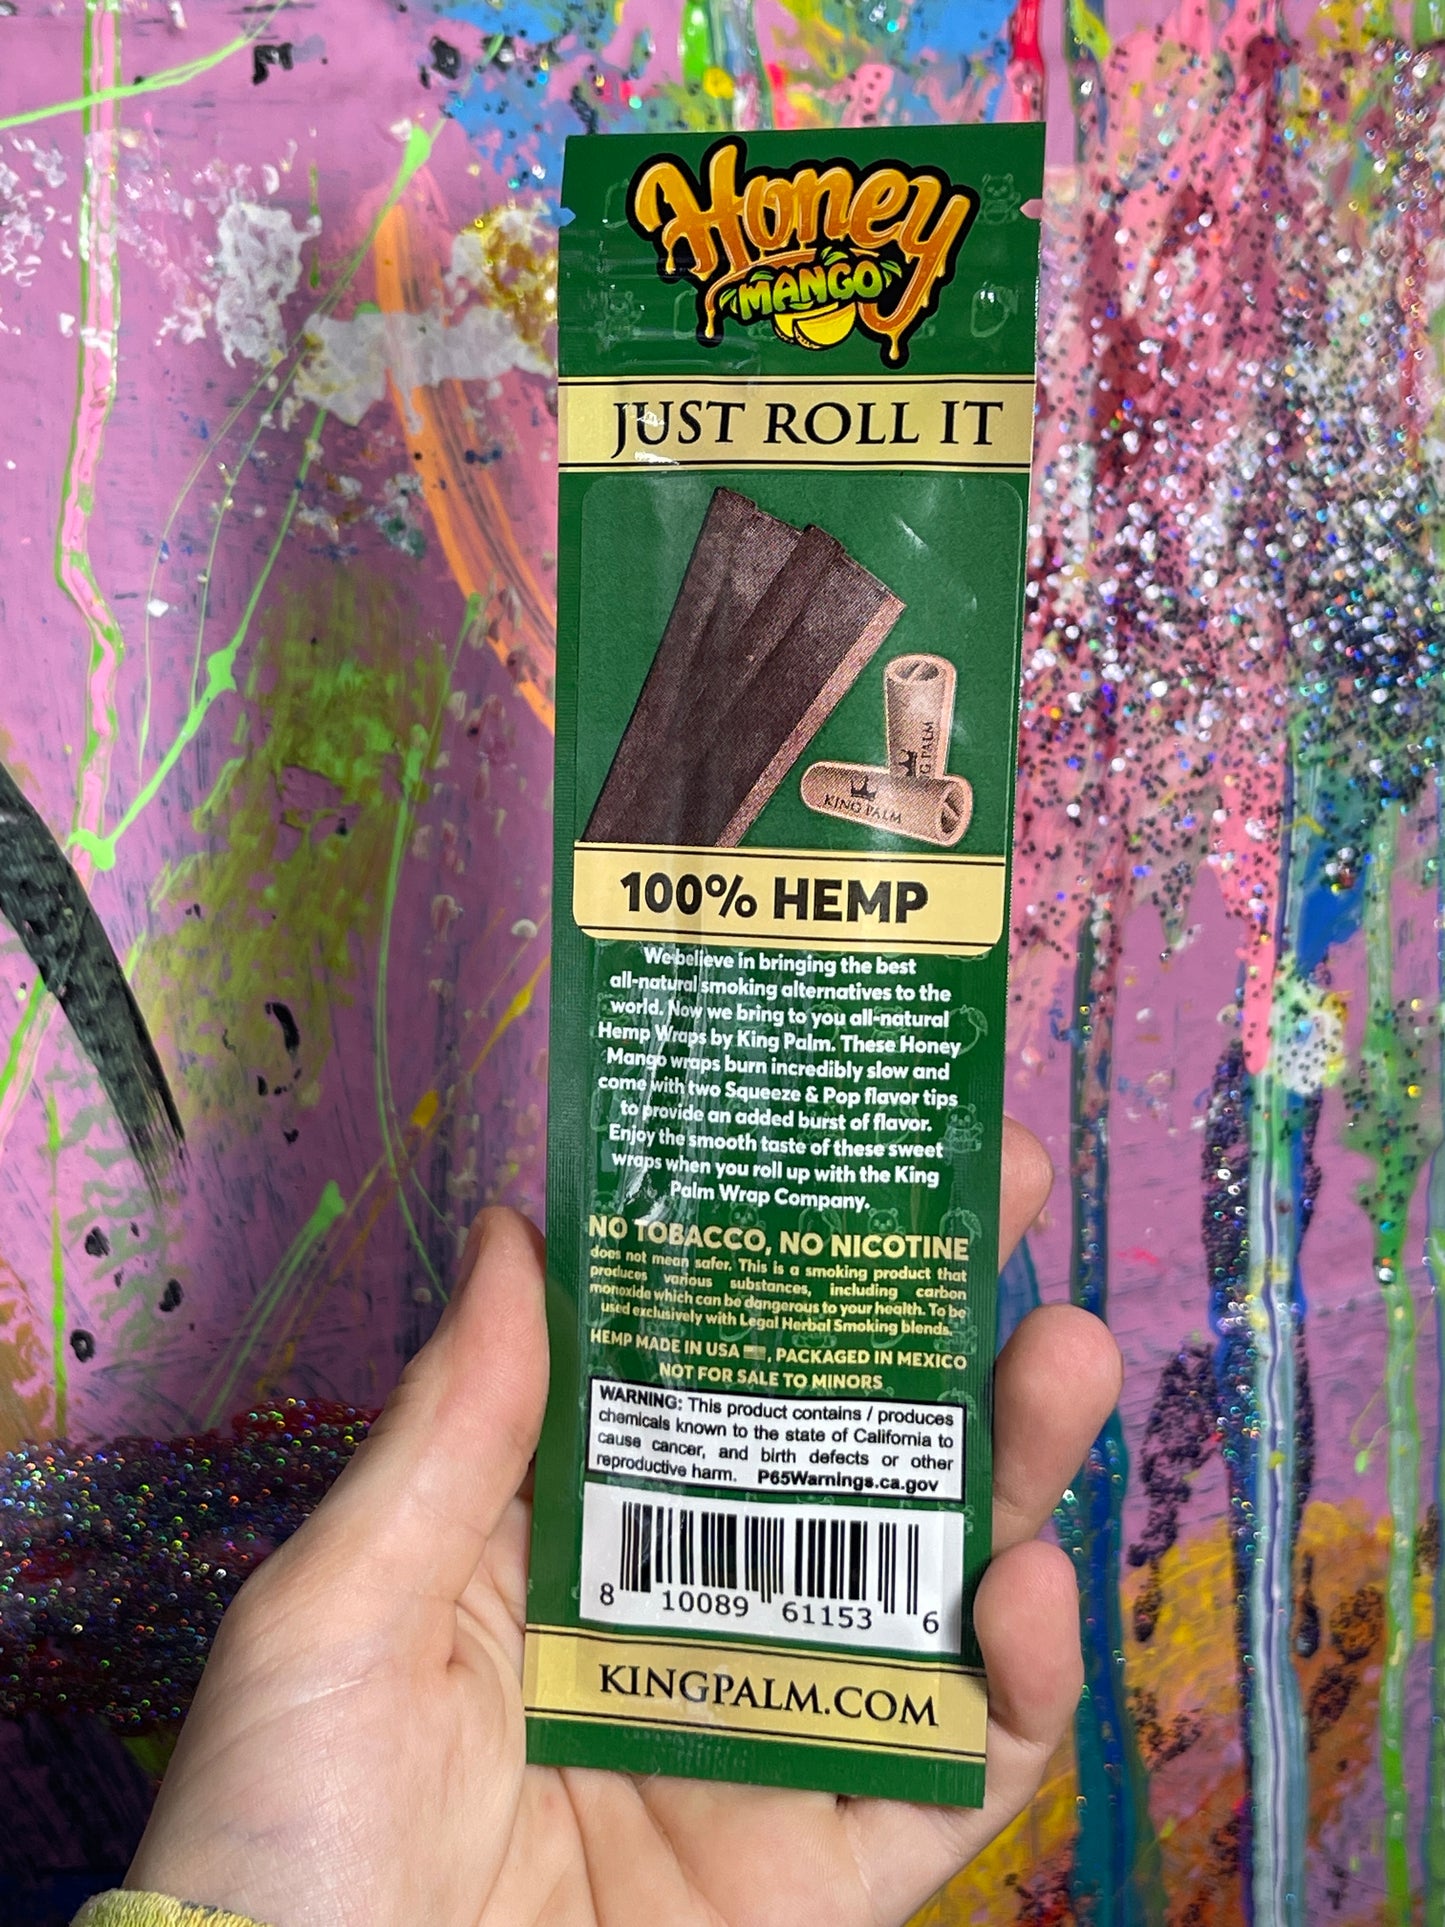 King Palm Hemp Wraps + Flavored Filters